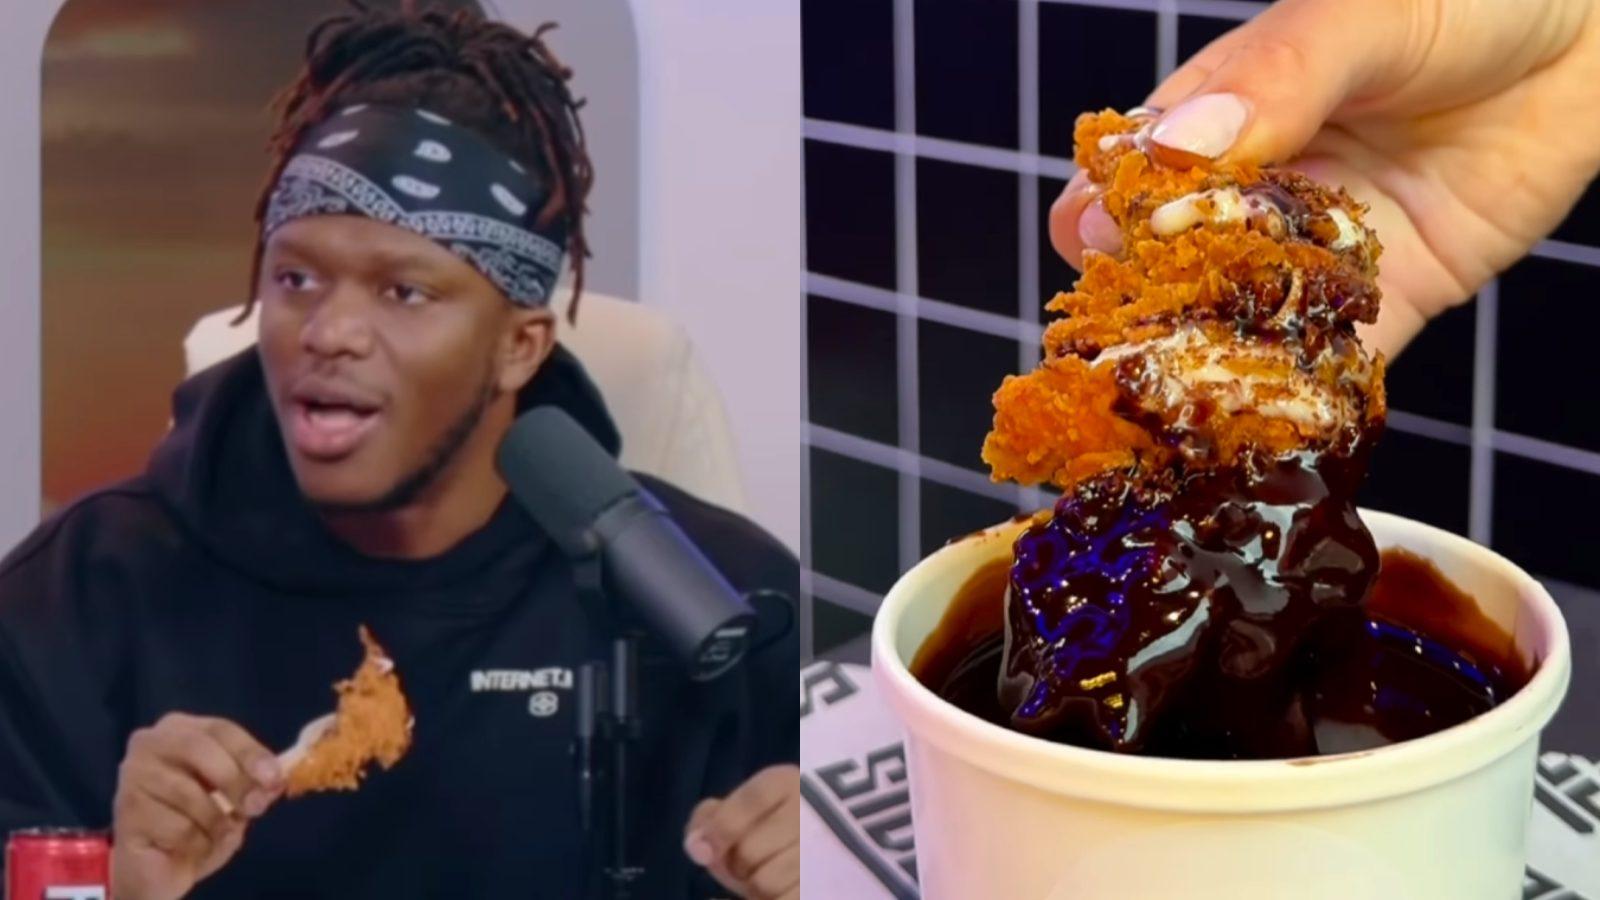 KSI eating the new Chocolate BBQ fried chicken range from Sides.